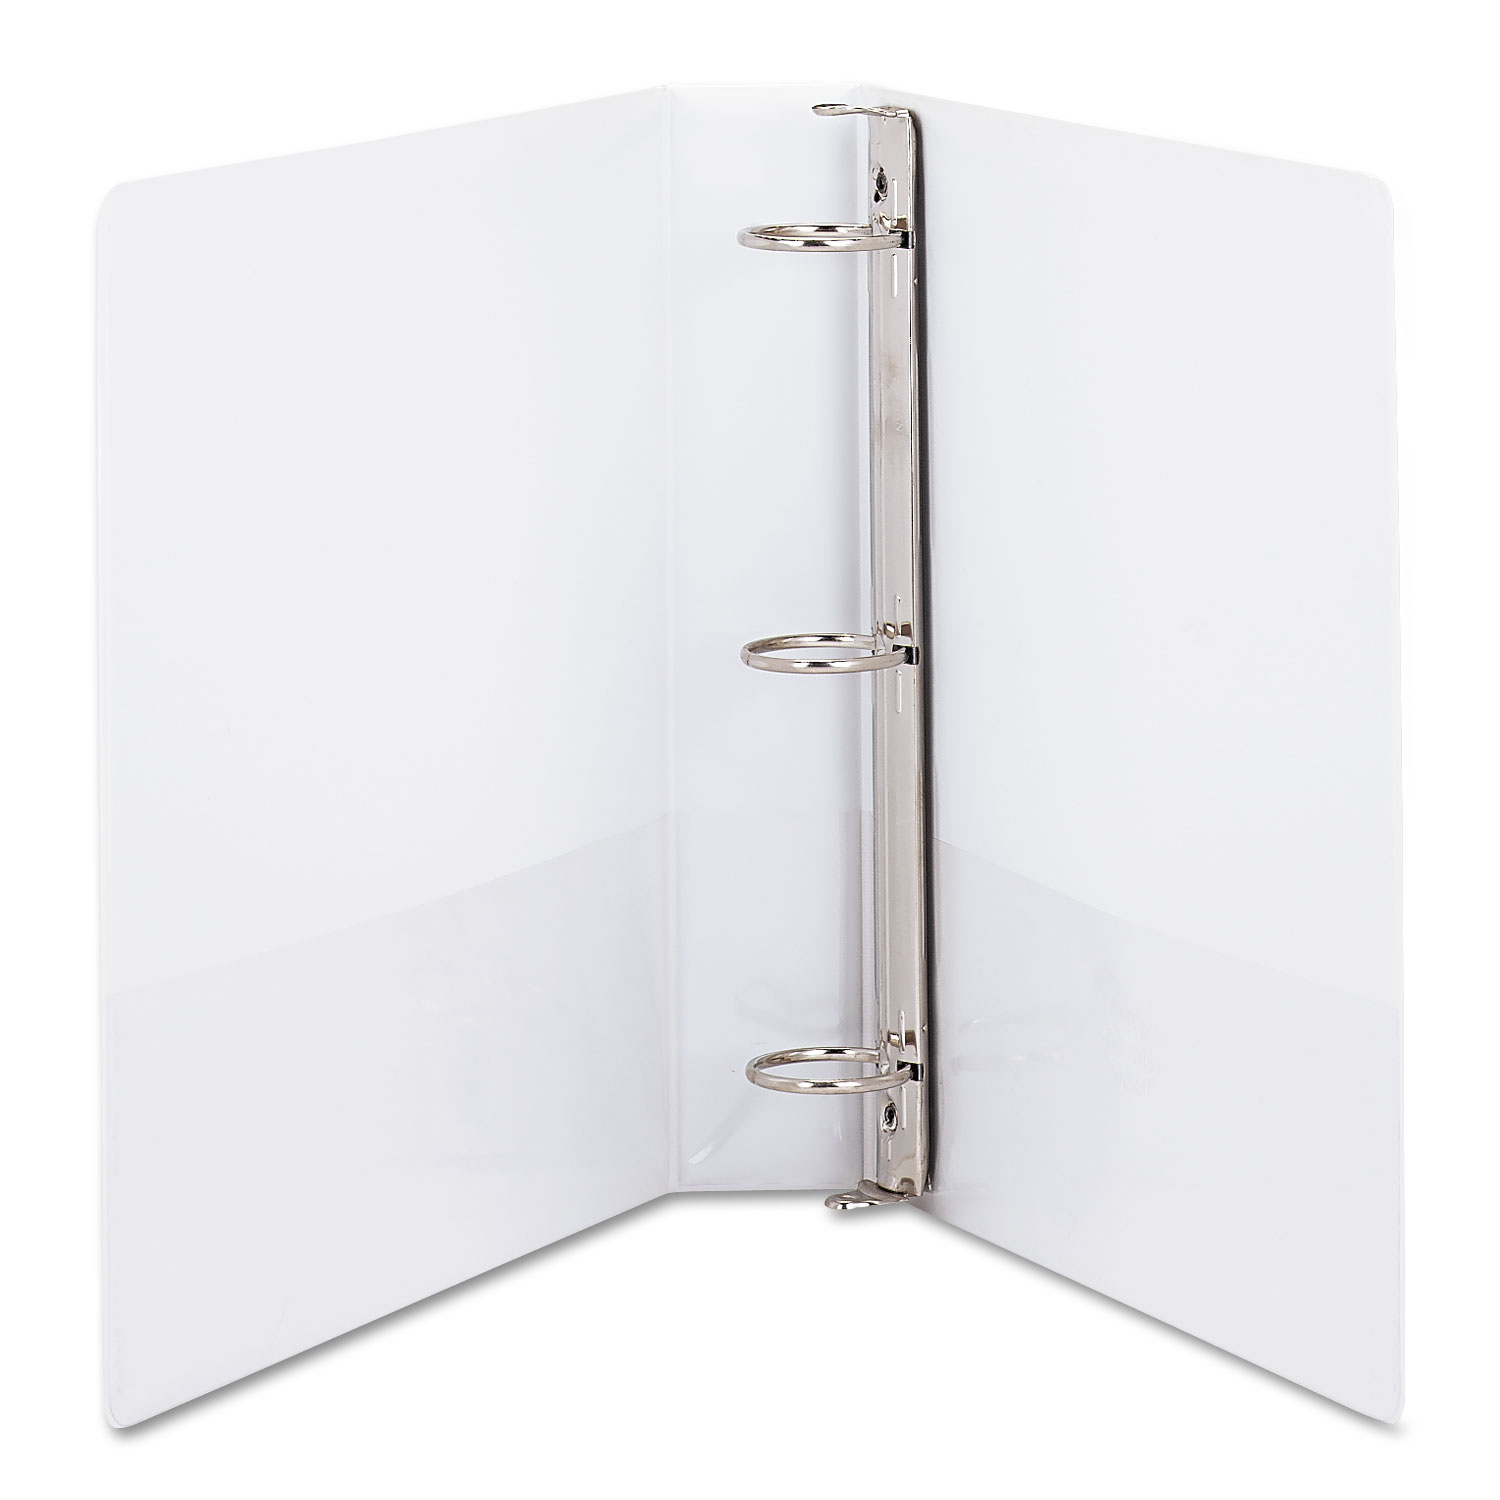 Clean Touch Locking Round Ring View Binder, Antimicrobial, 1 1/2 Cap, White